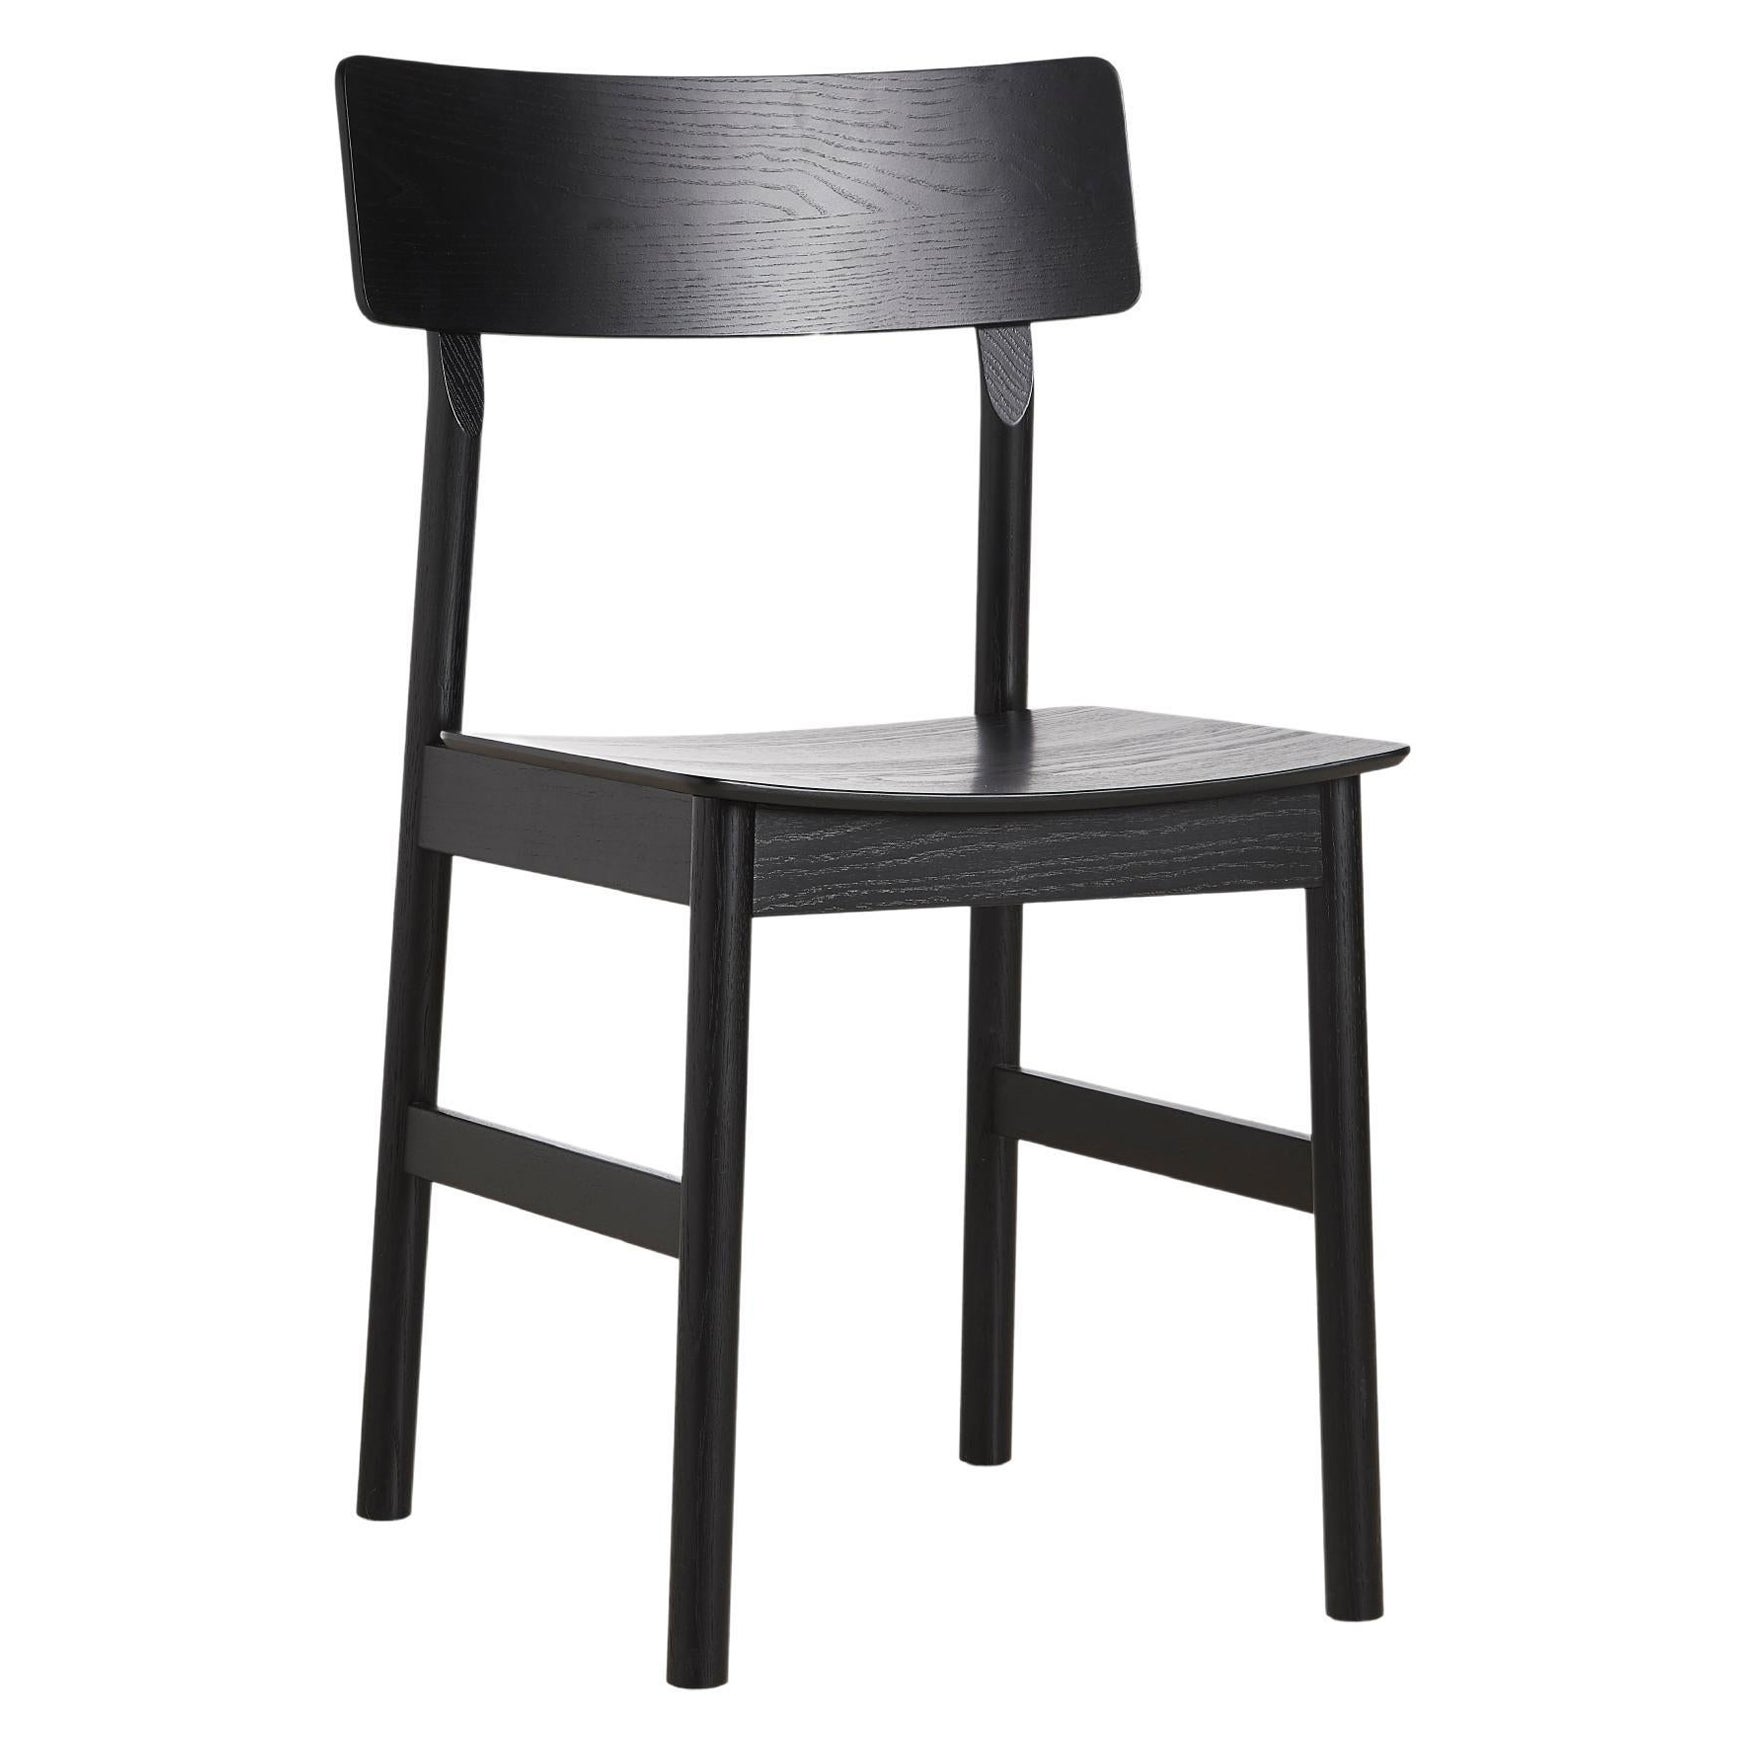 Pause Black Ash Dining Chair 2.0 by Kasper Nyman For Sale